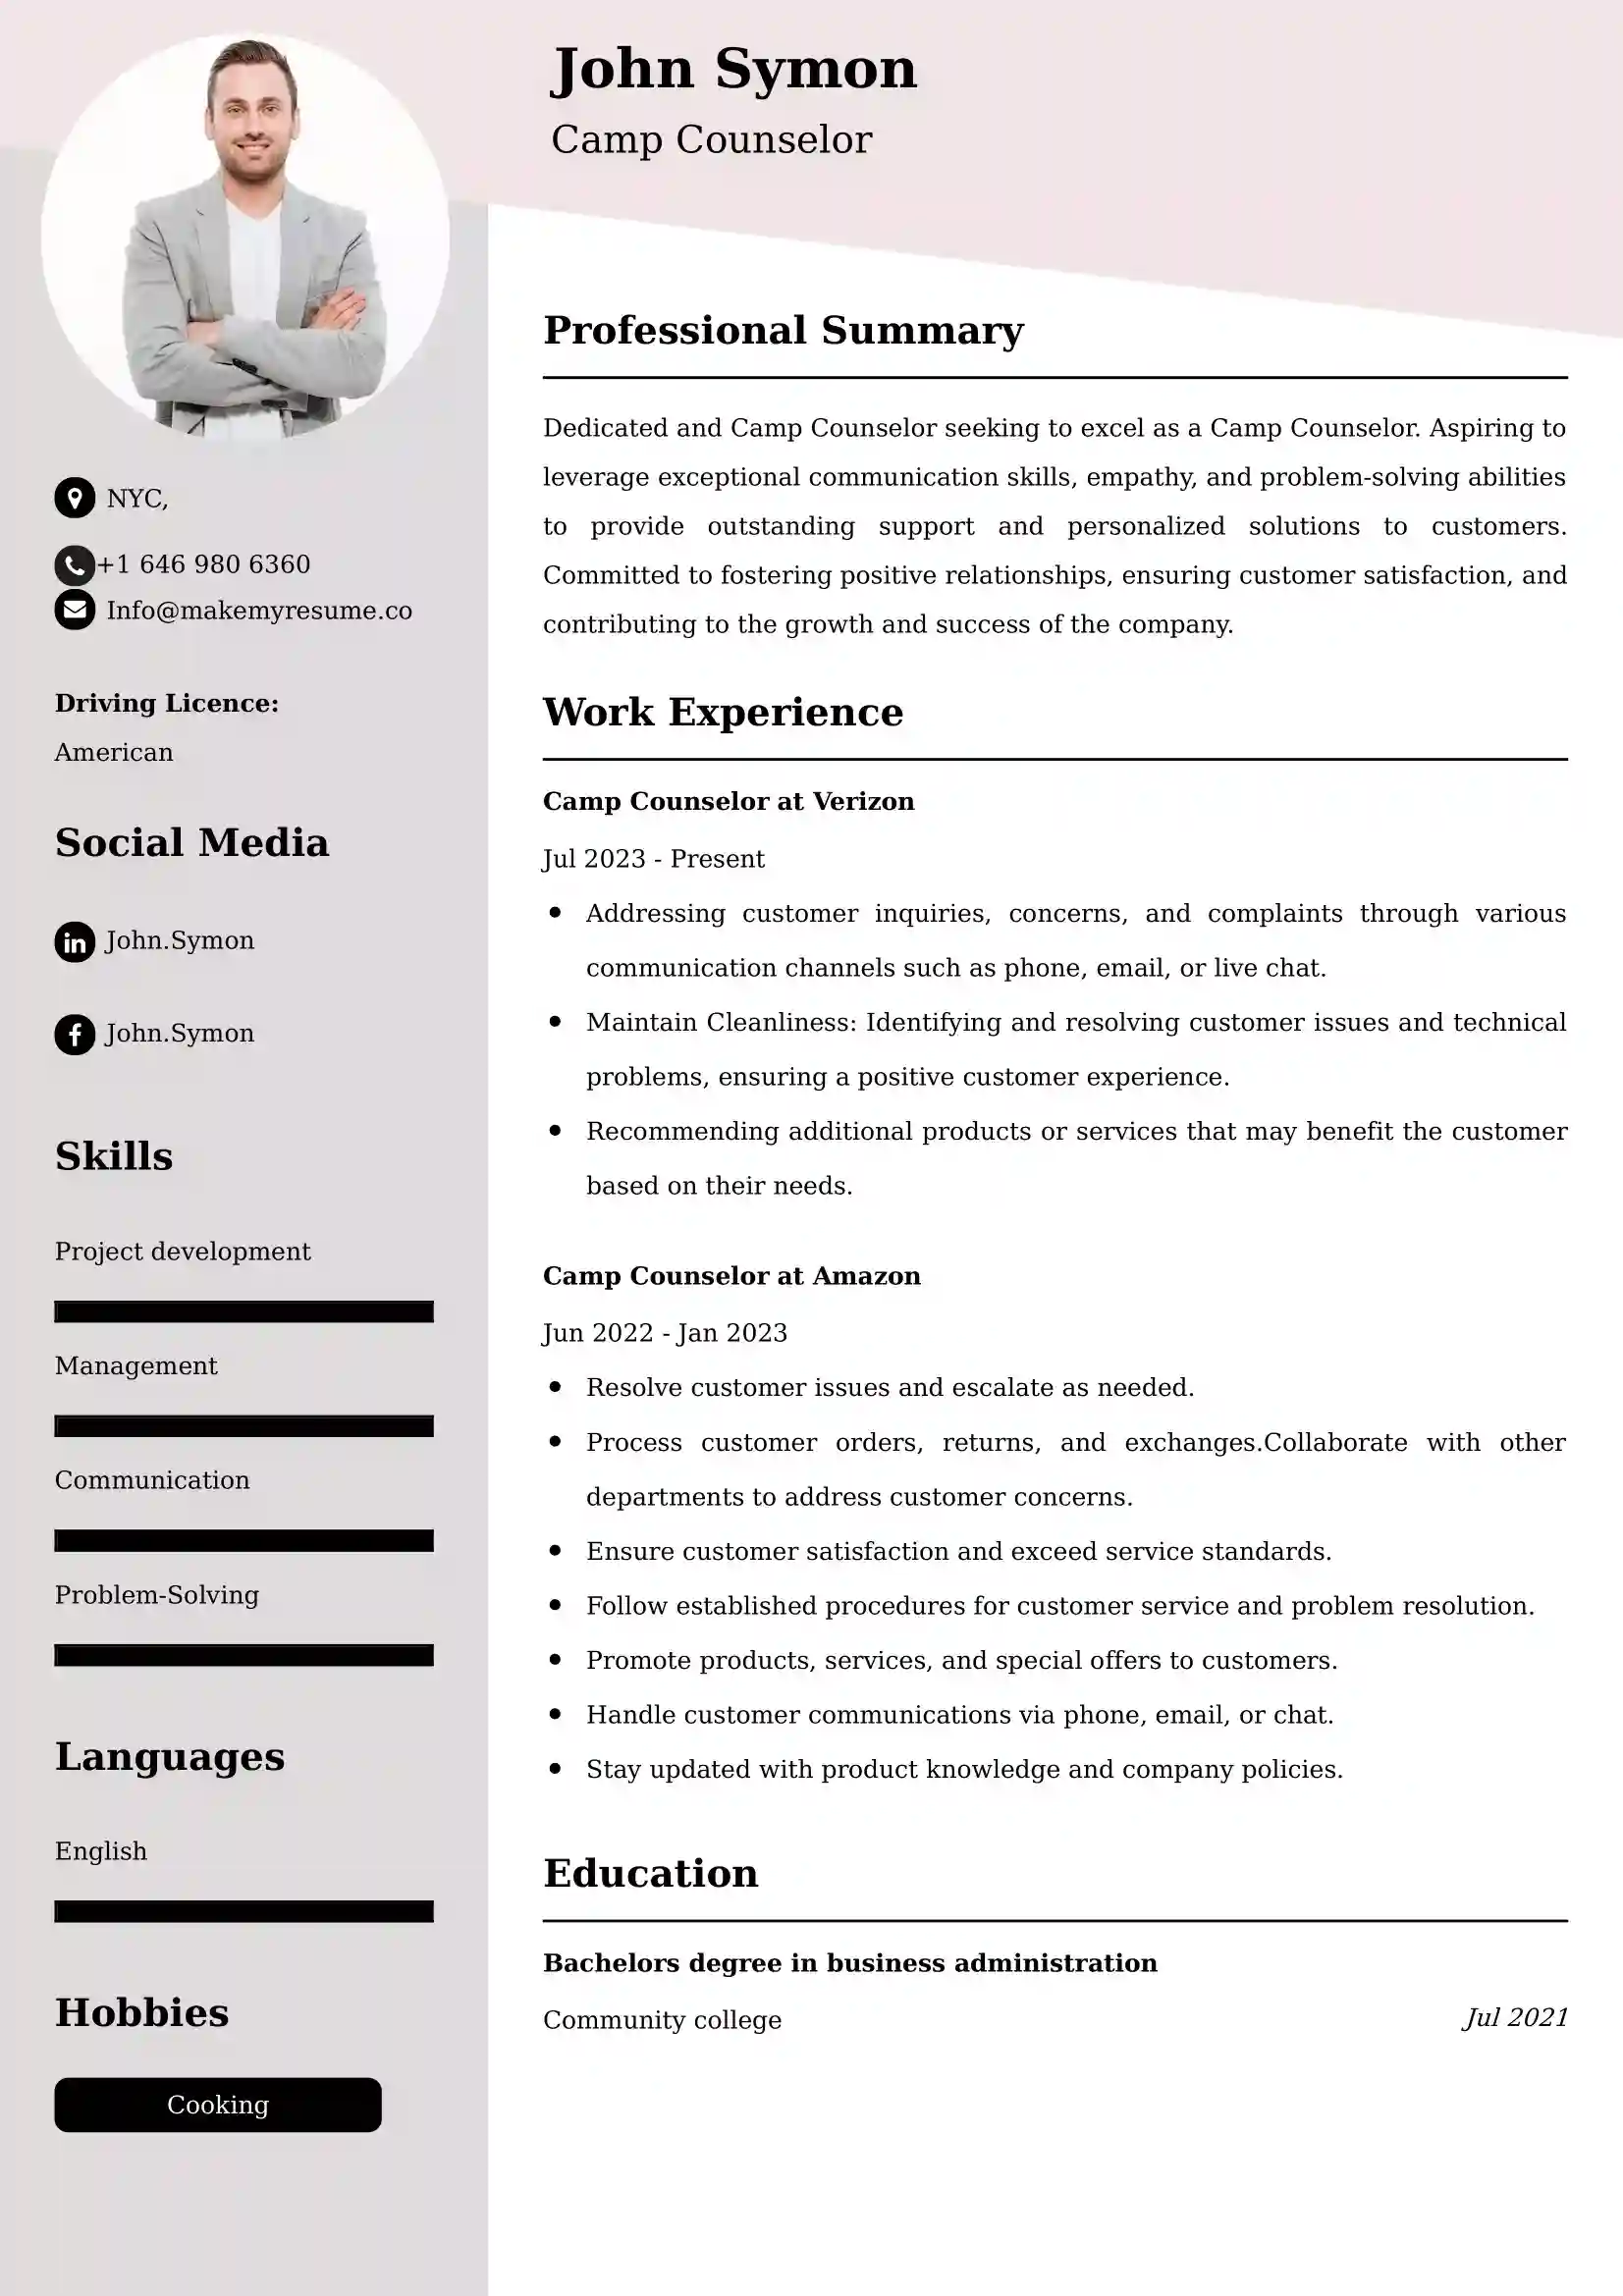 Camp Counselor Resume Examples India